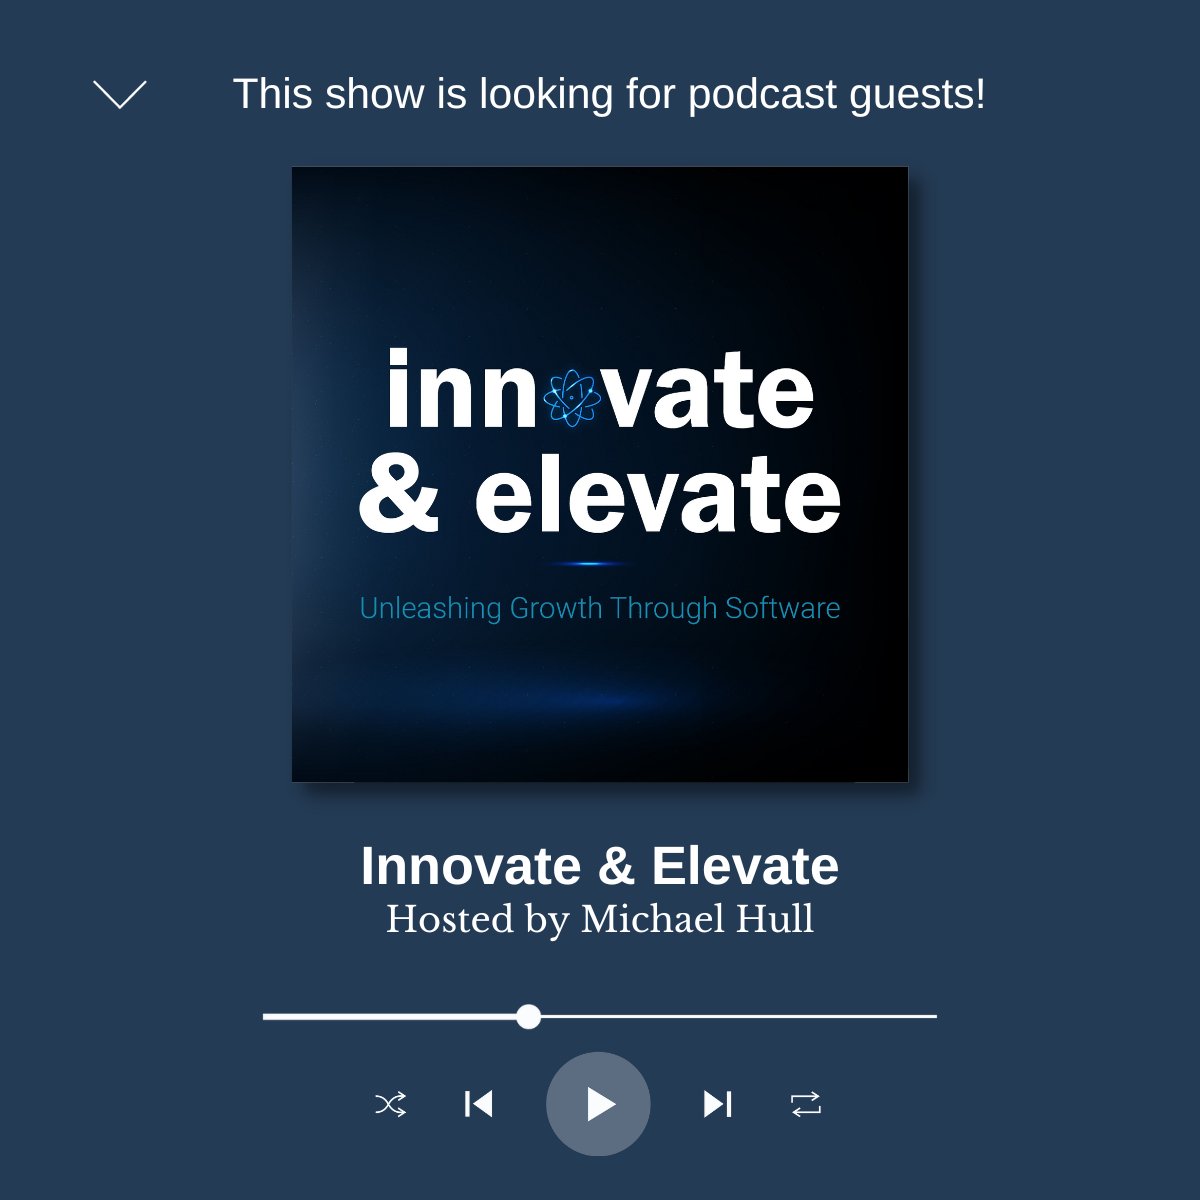 If you're a VP or above in engineering, and software, and specialize in PE-backed SaaS, apply to be a guest for the Innovate & Elevate Podcast hosted by the one and only Michael Hull of @GAPapps! Apply here: podcast.wearegap.com/podcast-gues #SaaS #FindaGuest #BeaGuest #journorequest